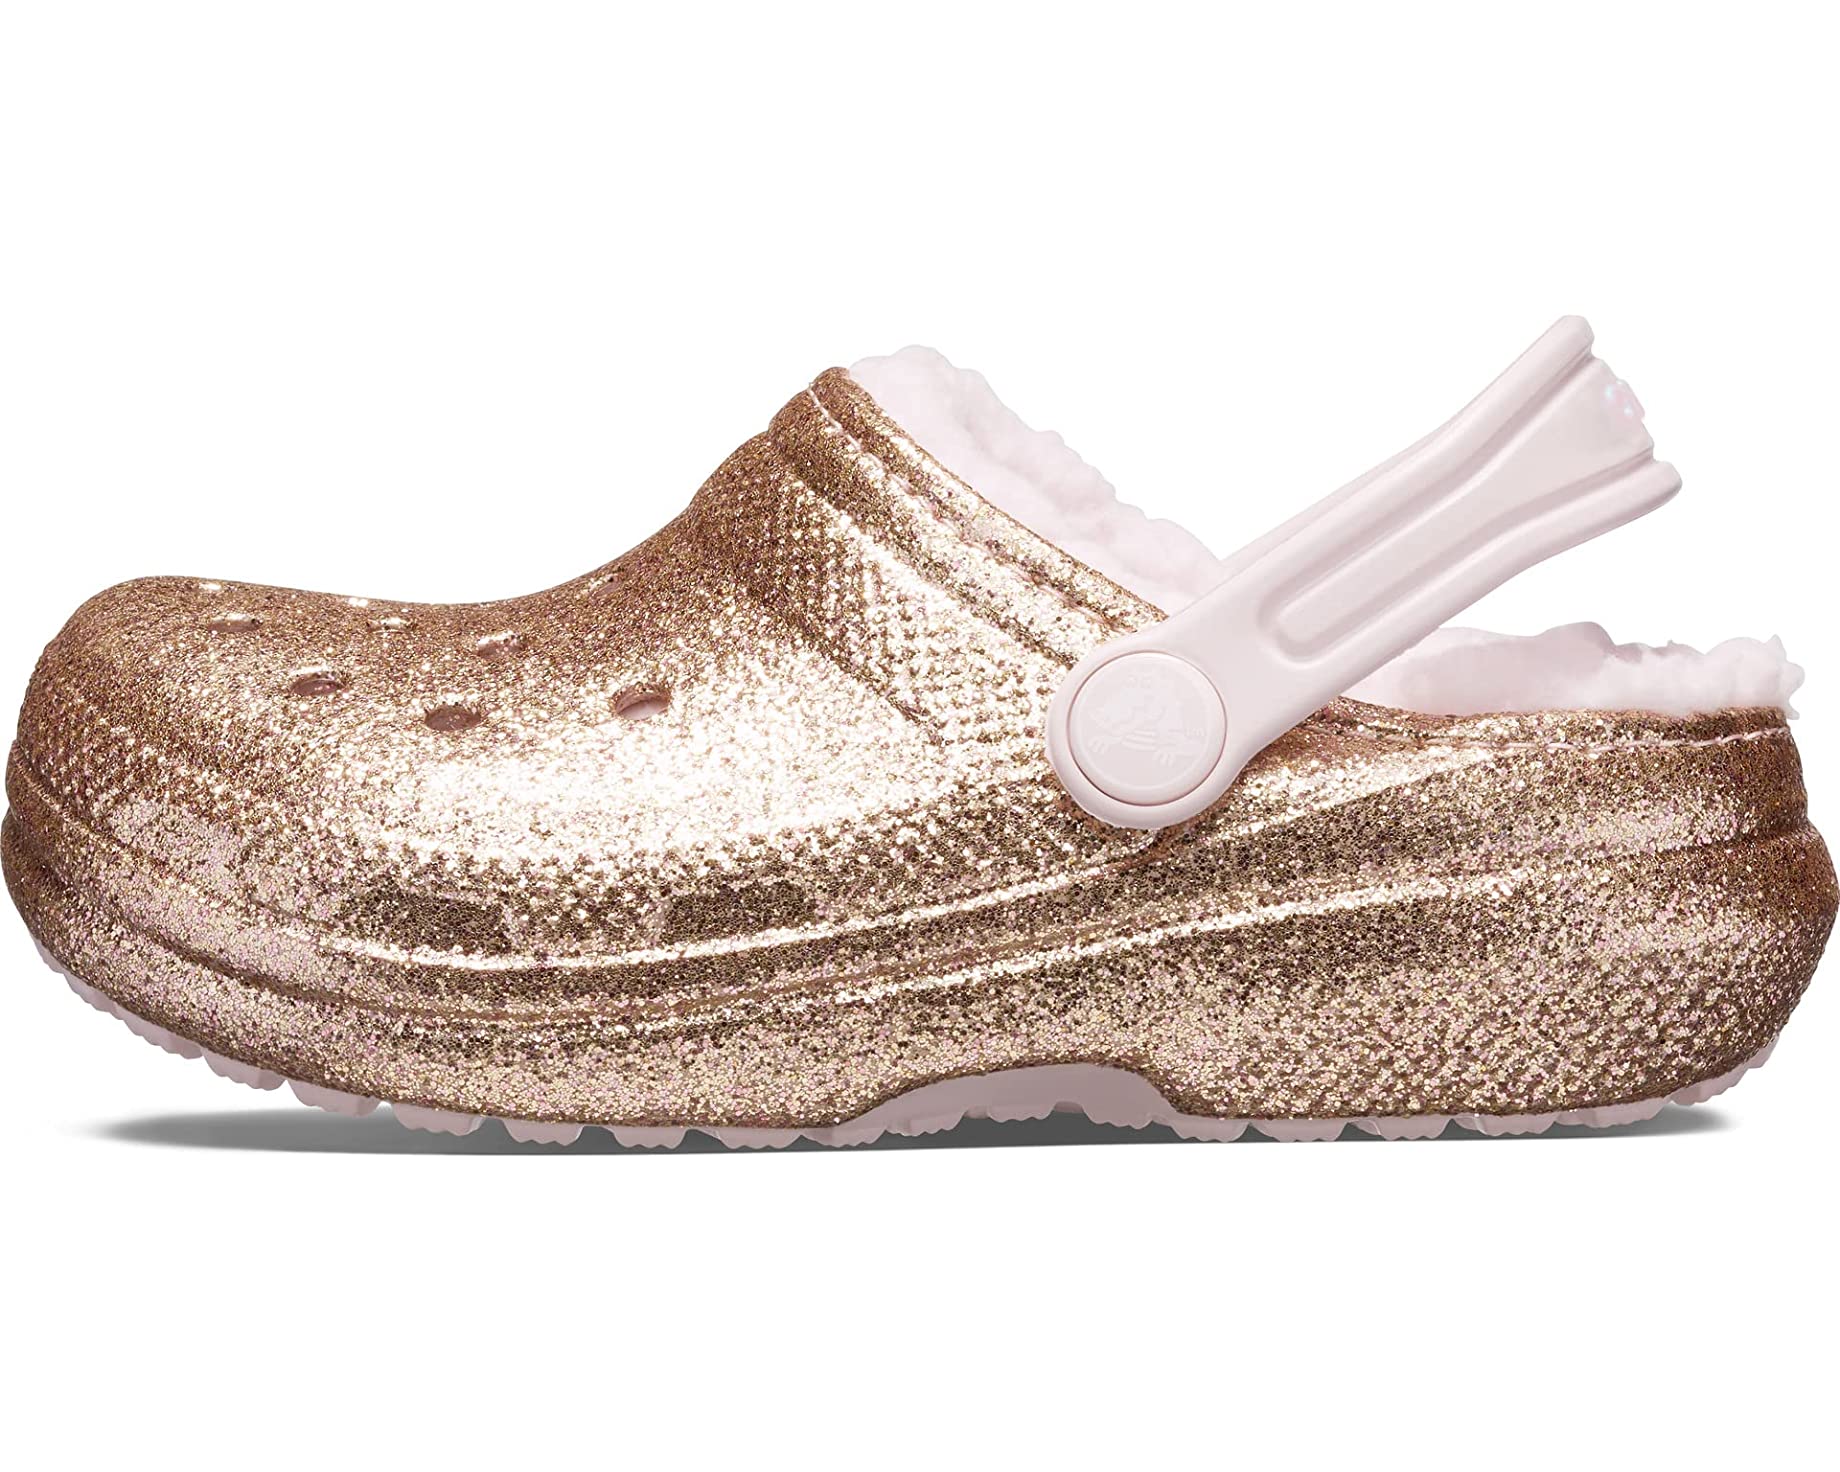 Crocs Toddler Kids' Classic Lined Glitter Clogs (Size 5-10, Gold/Barely Pink) $18.98 + Free Shipping